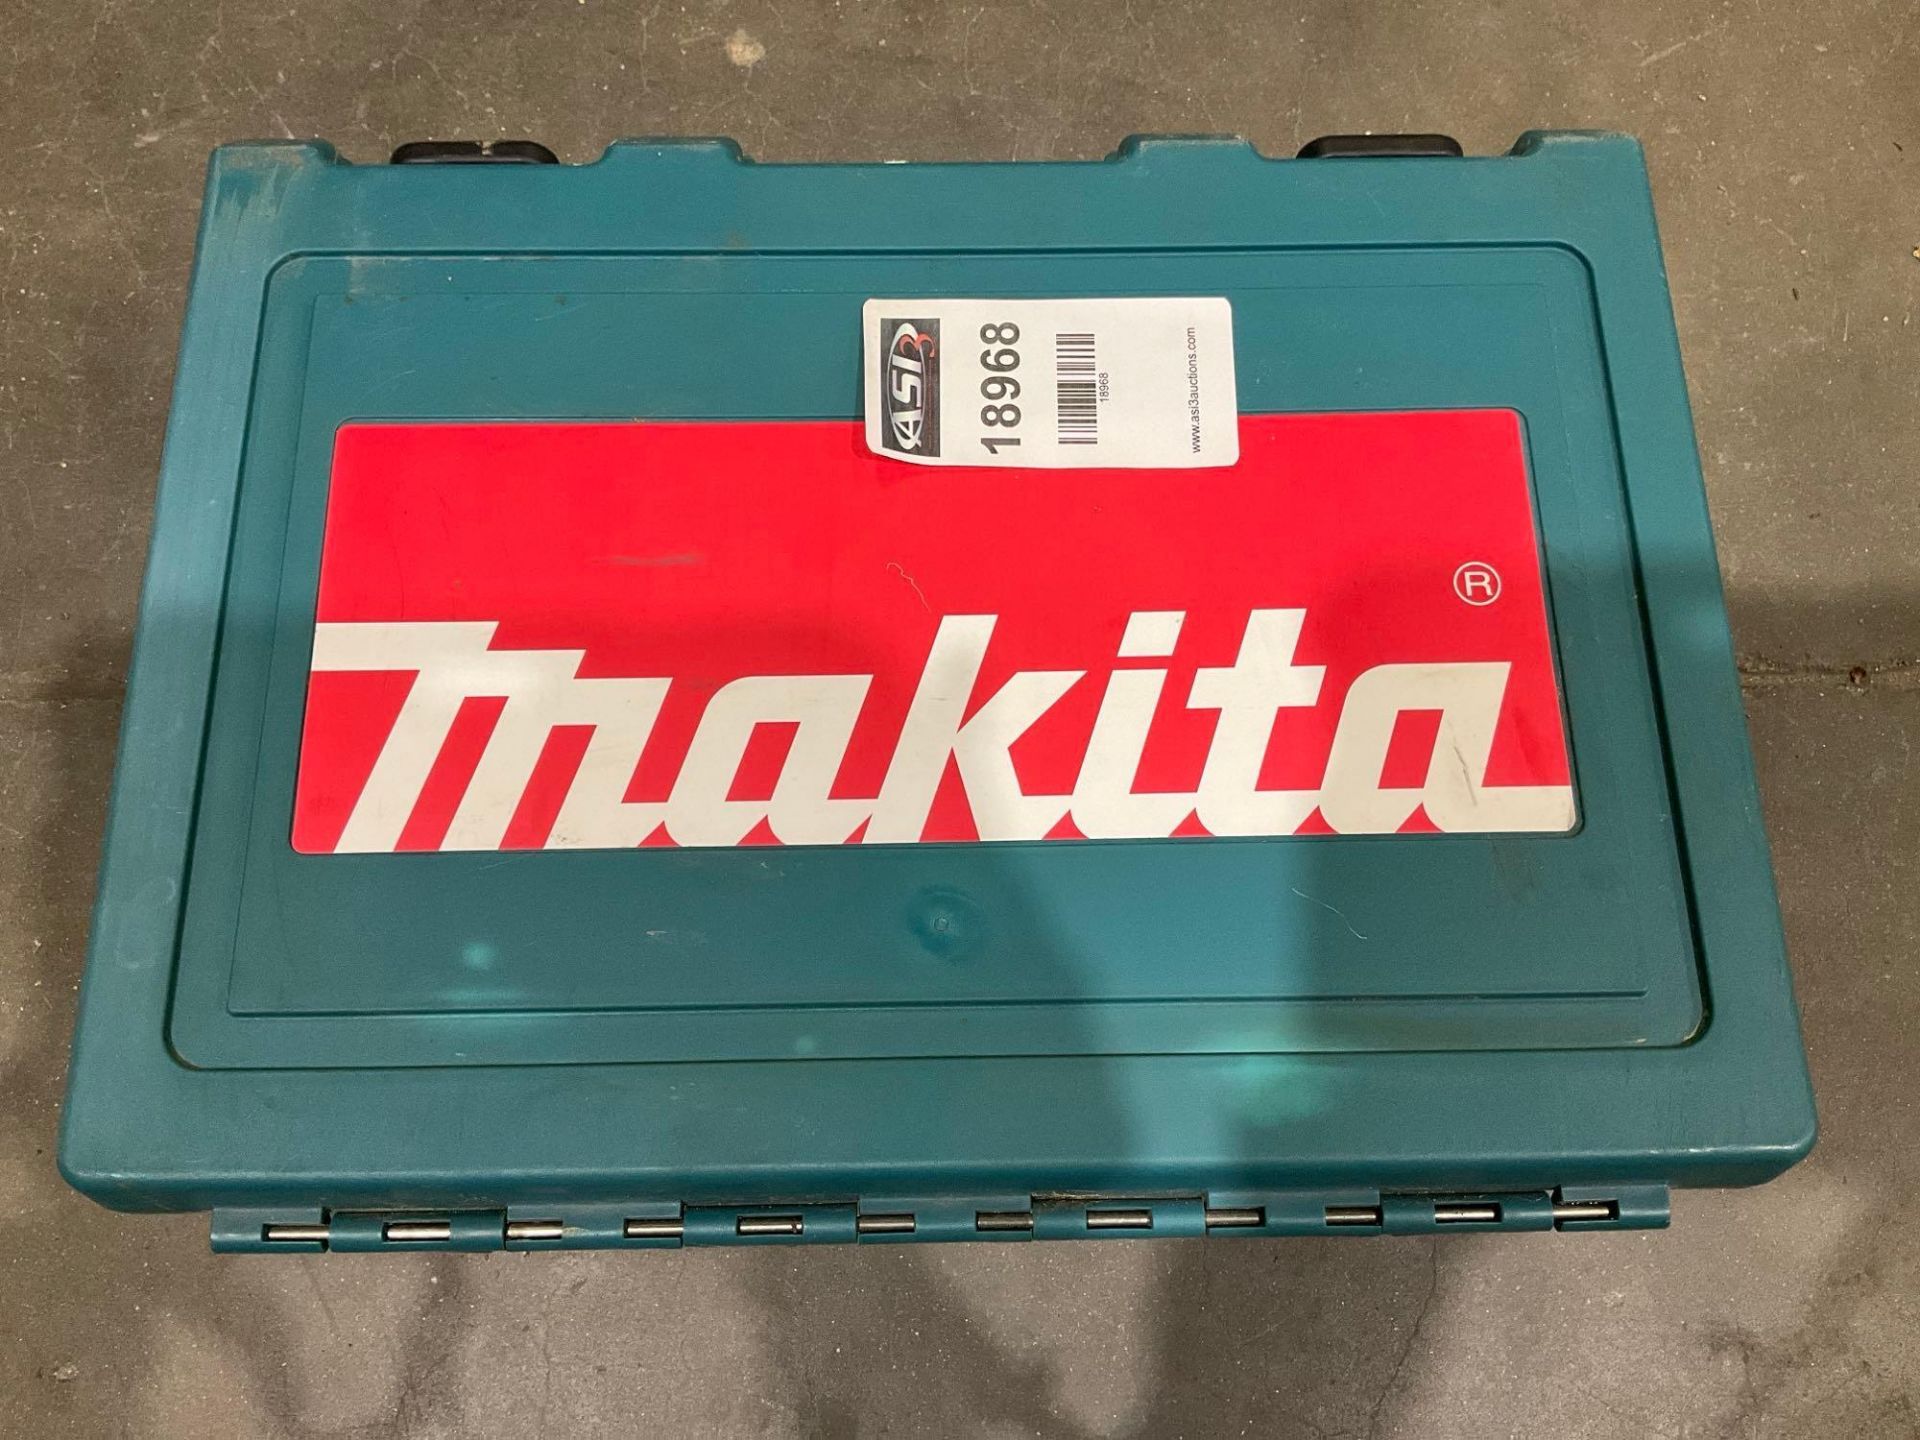 MAKITA 2 SPEED HAMMER DRILL MODEL HP2050 WITH CARRYING CASE , 120VOLTS, 6.6A, RECONDITIONED - Image 6 of 6